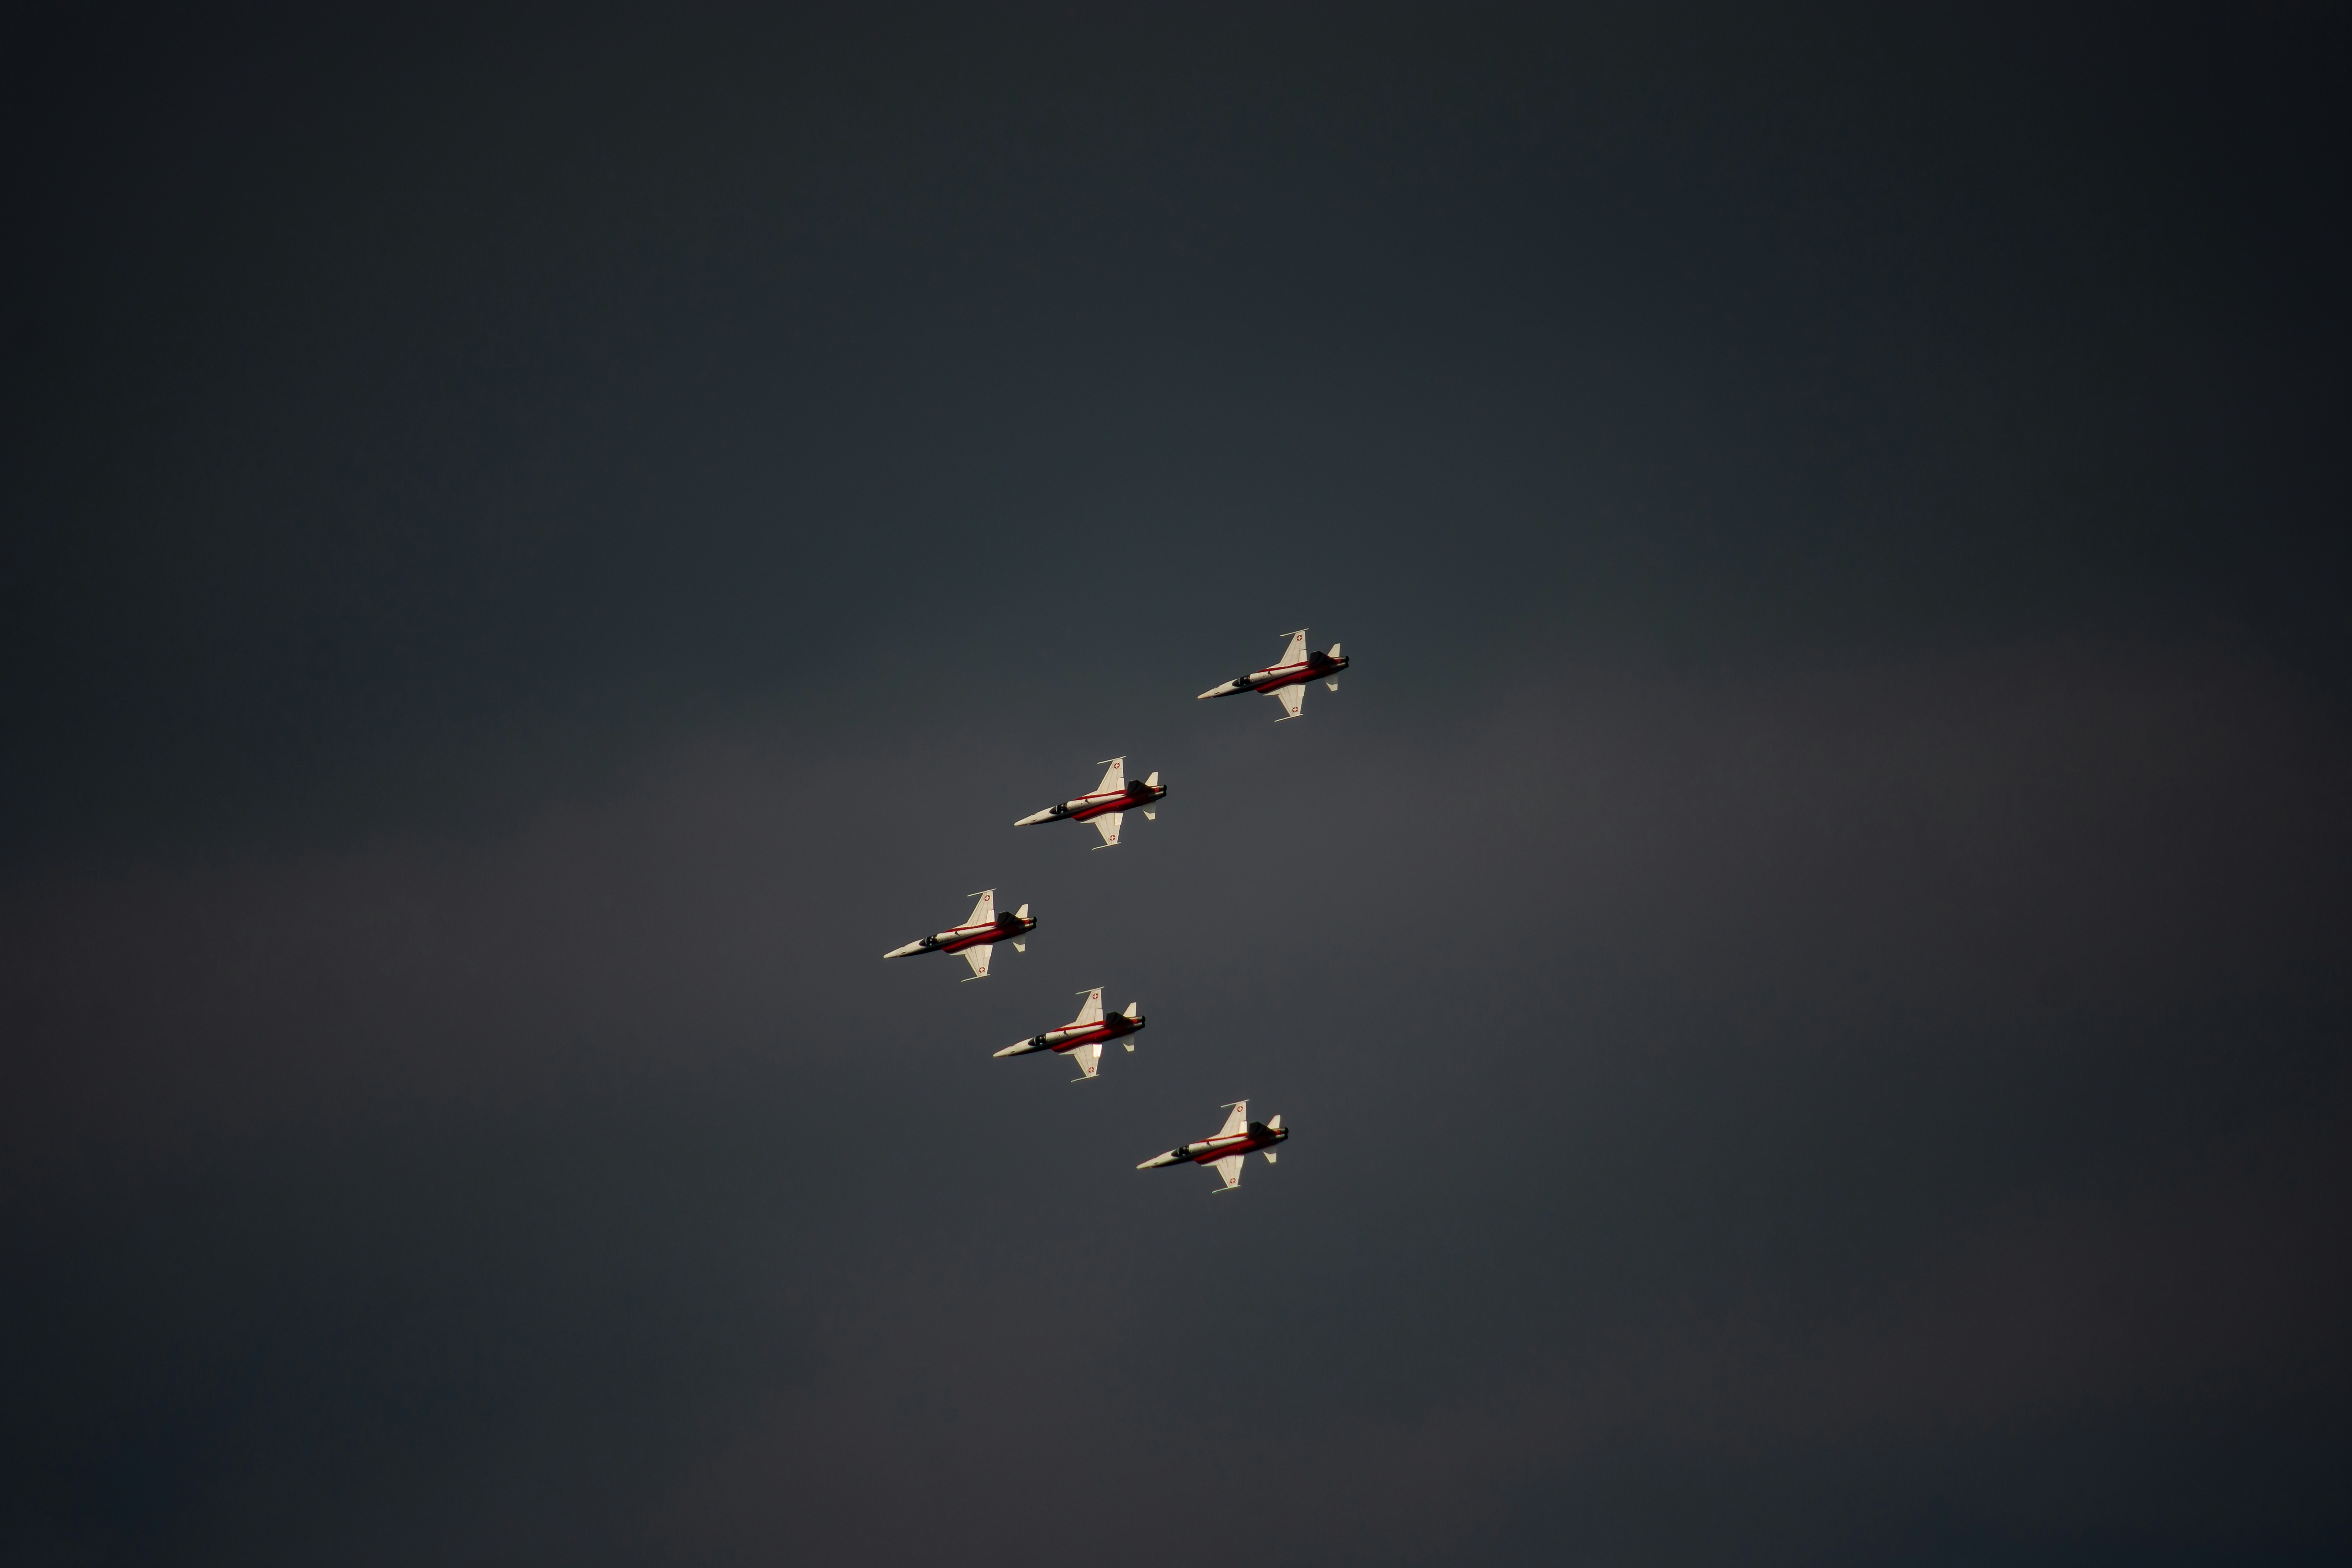 Airshow for Arboner Classics. We see here the Swiss Patrouille in a Formation